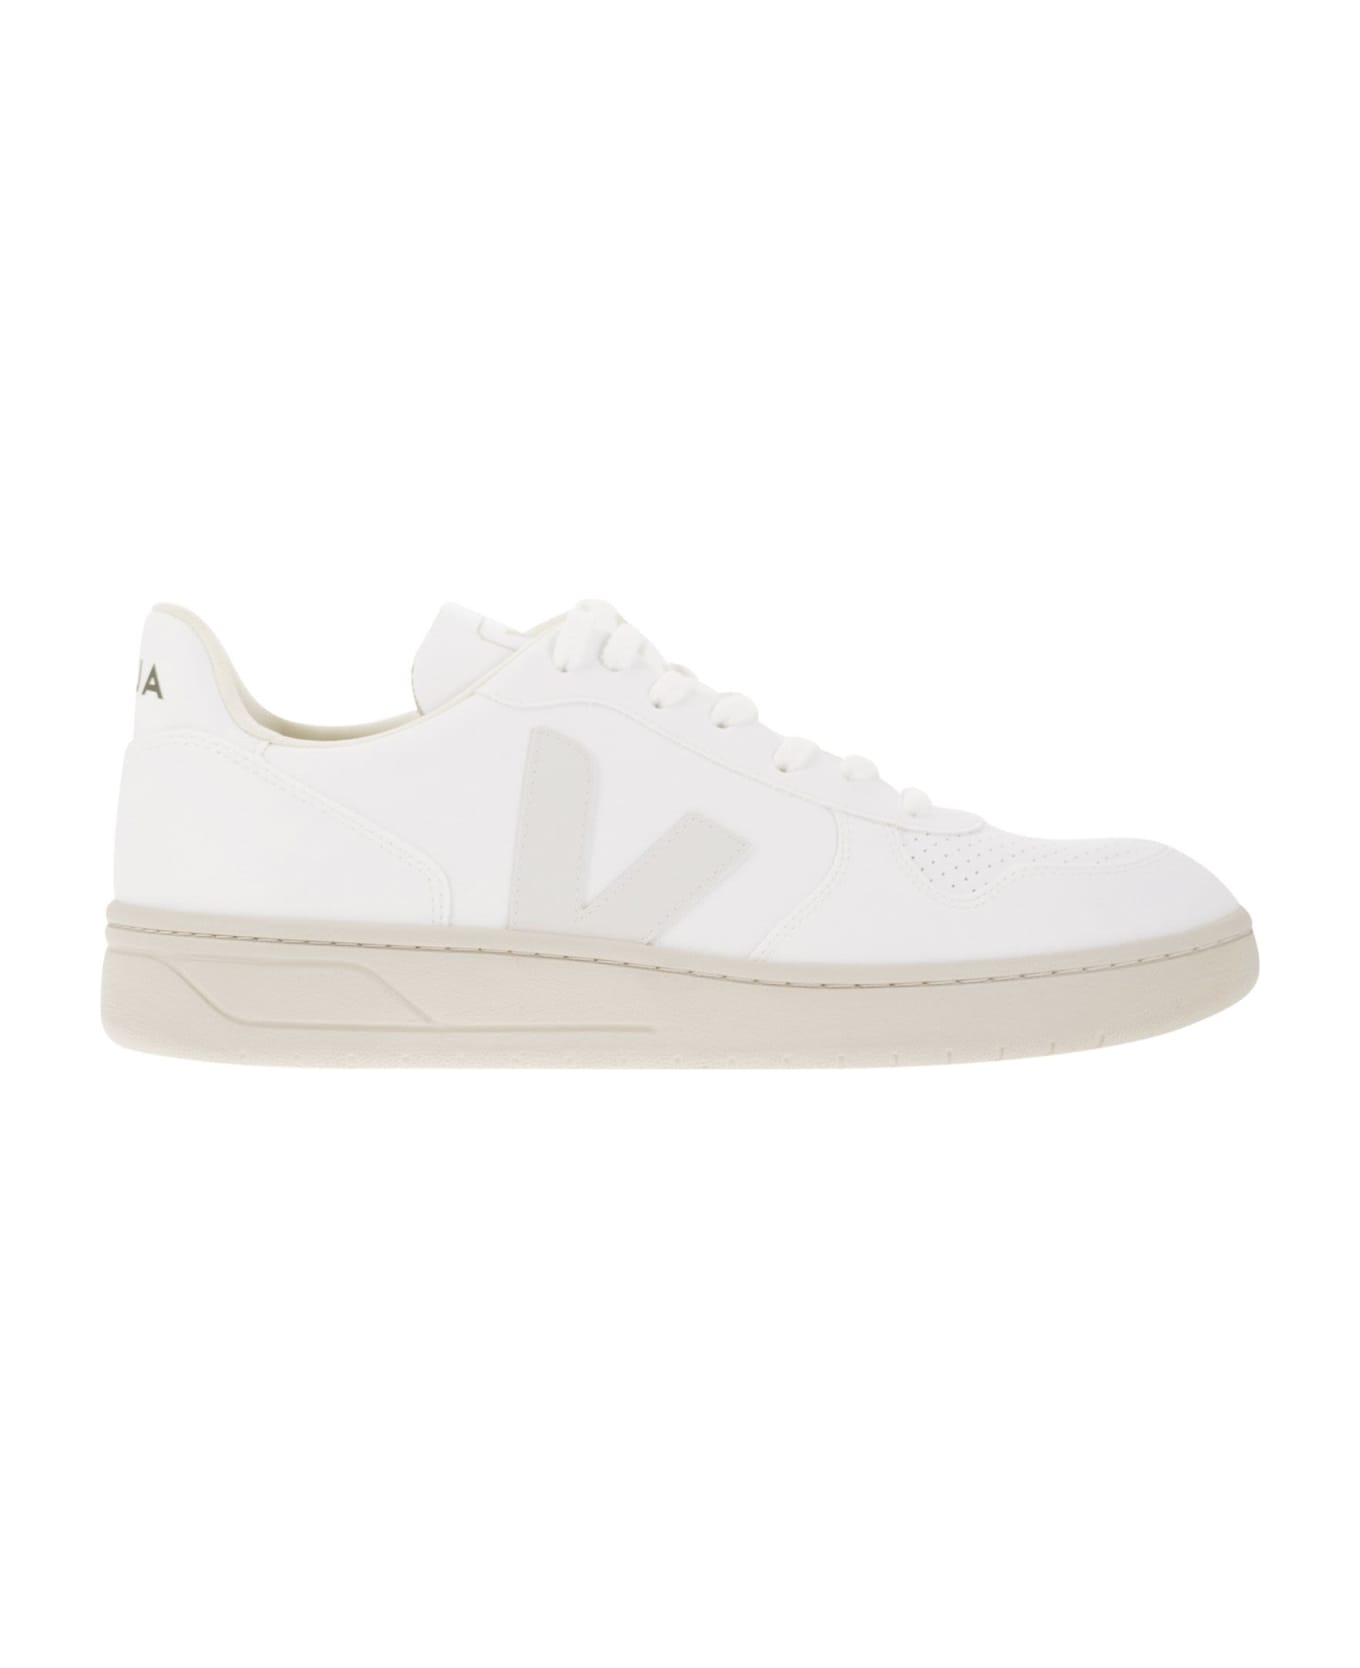 Veja Leather Trainers With Logo - White